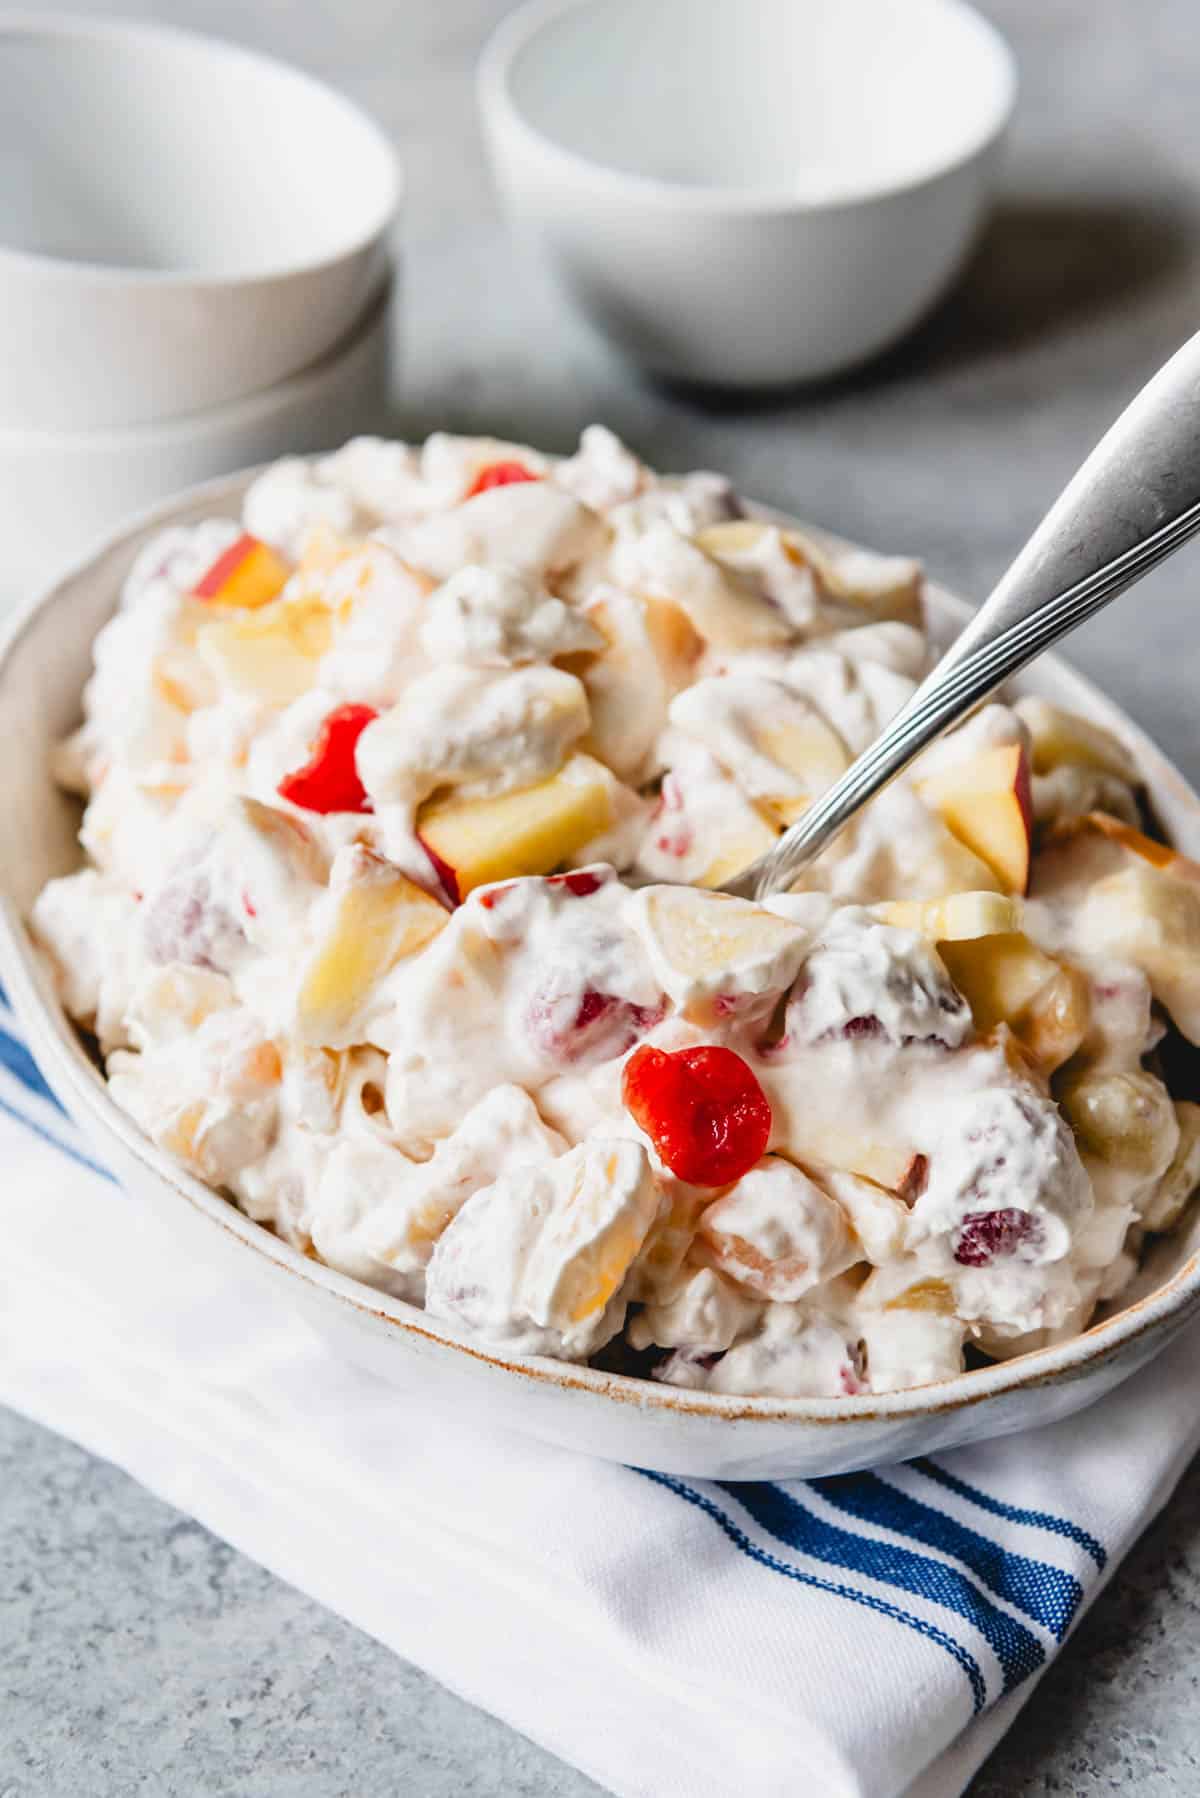 A bowl filled with fruit salad with marshmallows and whipped cream.